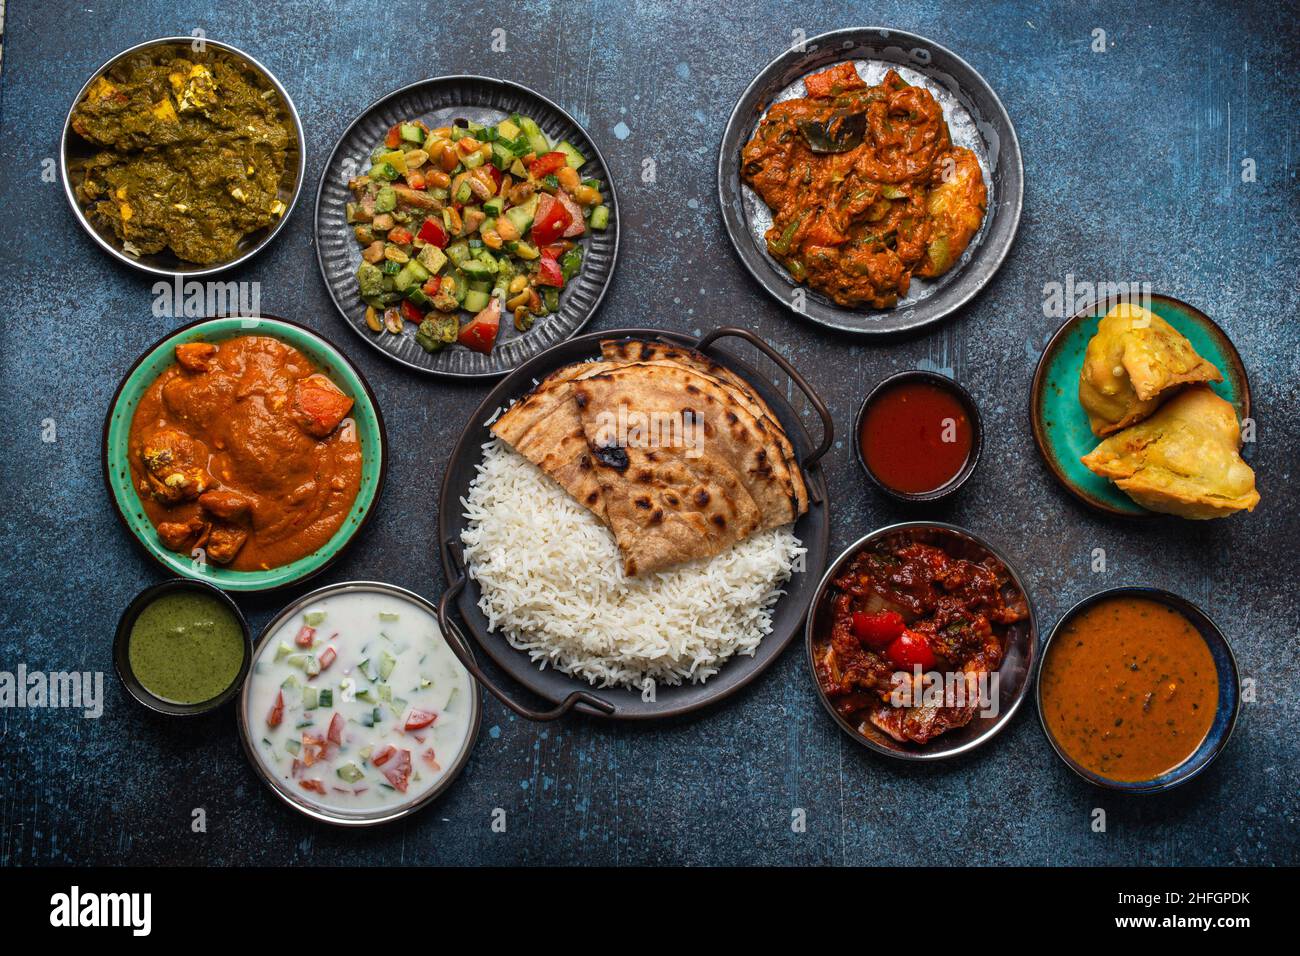 Authentic Indian dishes and snacks Stock Photo